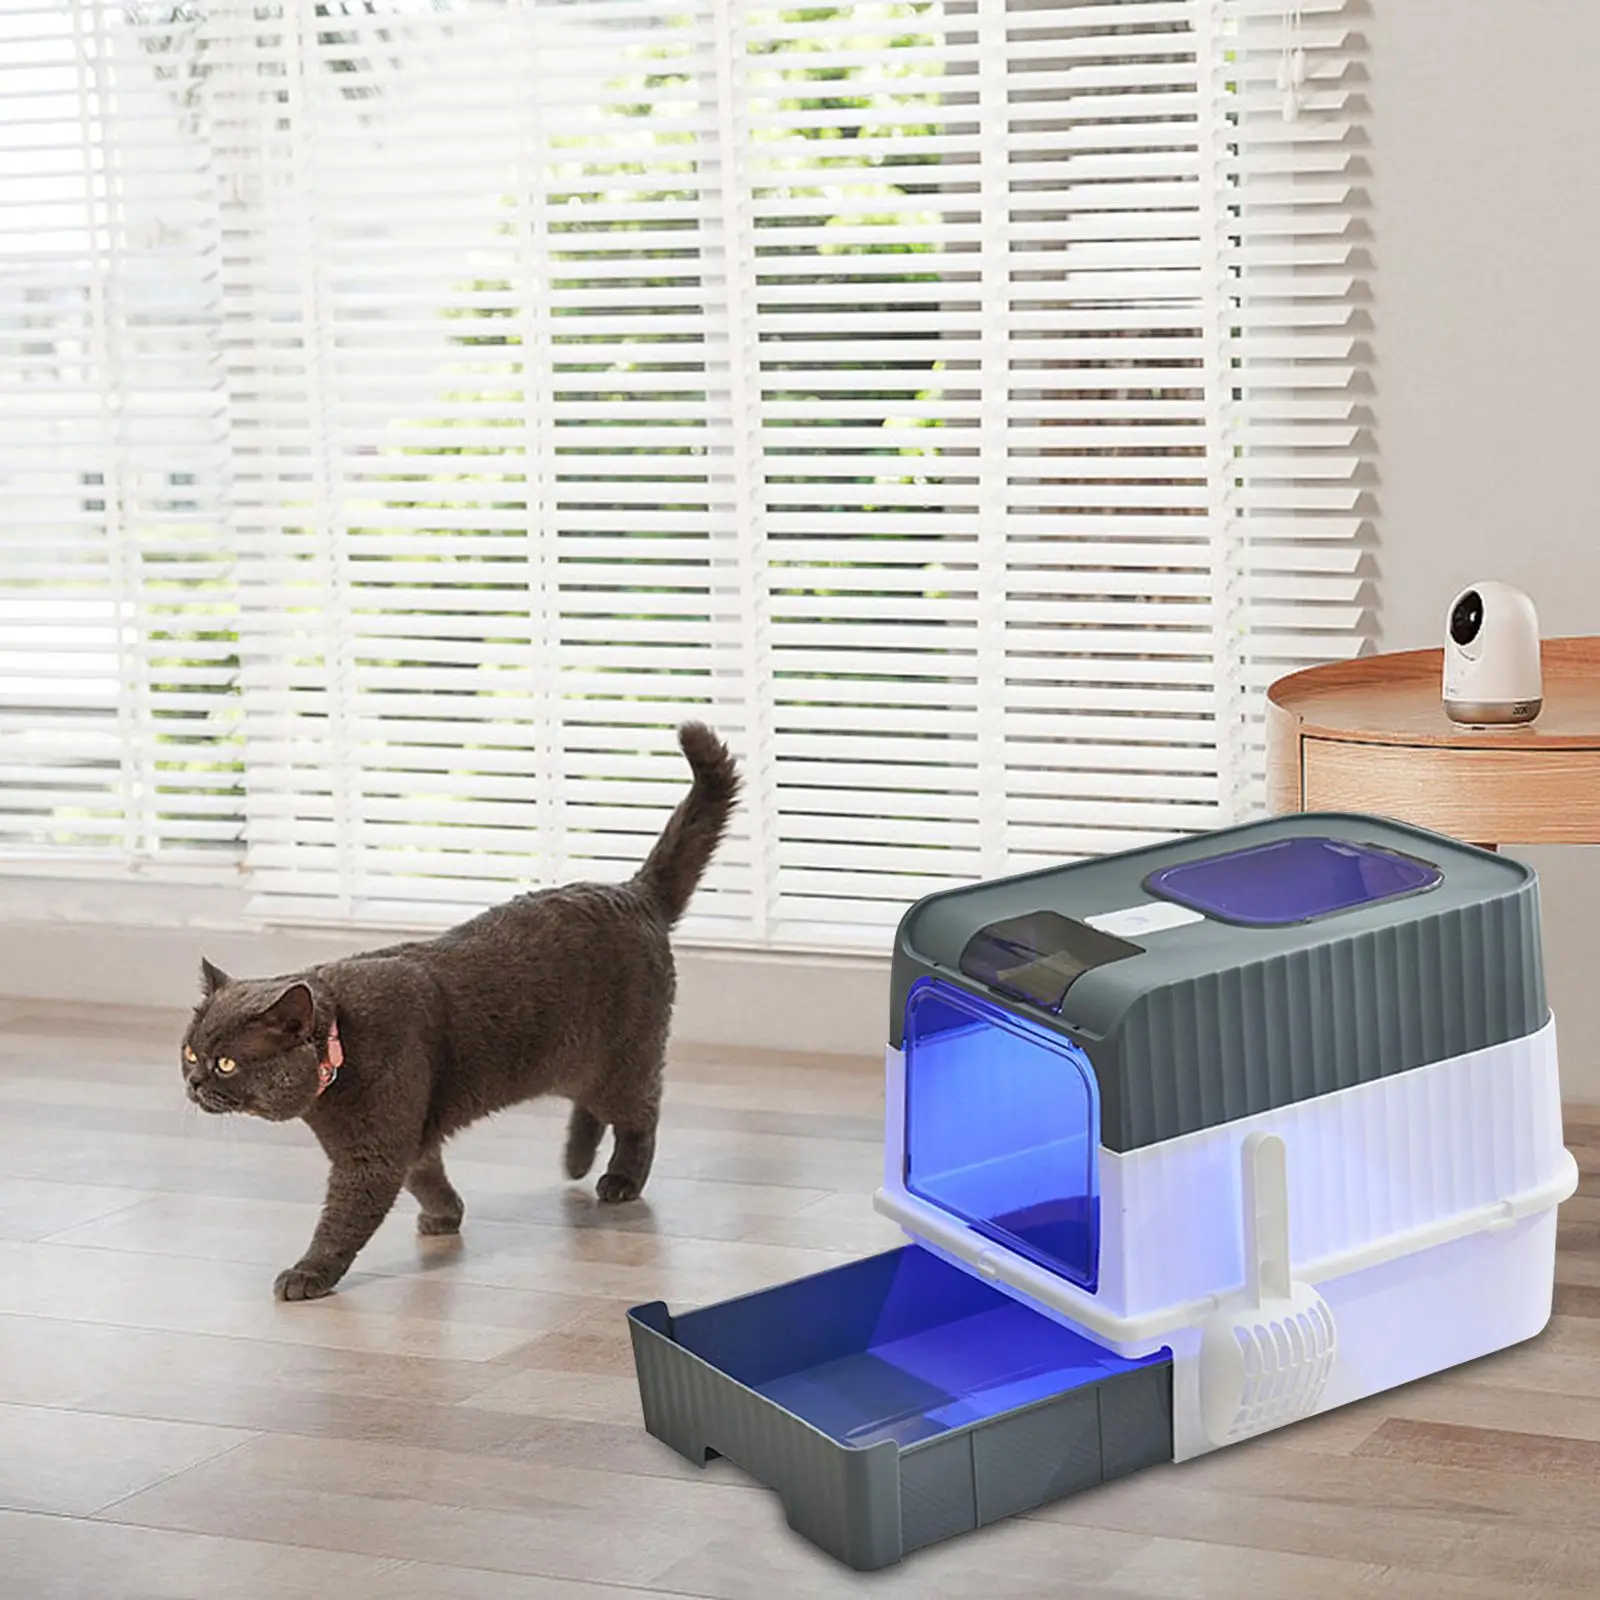 Fully Enclosed Cat Litter Box Easy to Carry and Clean Sandbox with Front Door Hooded Cat Toilet with Lid for Small Animals